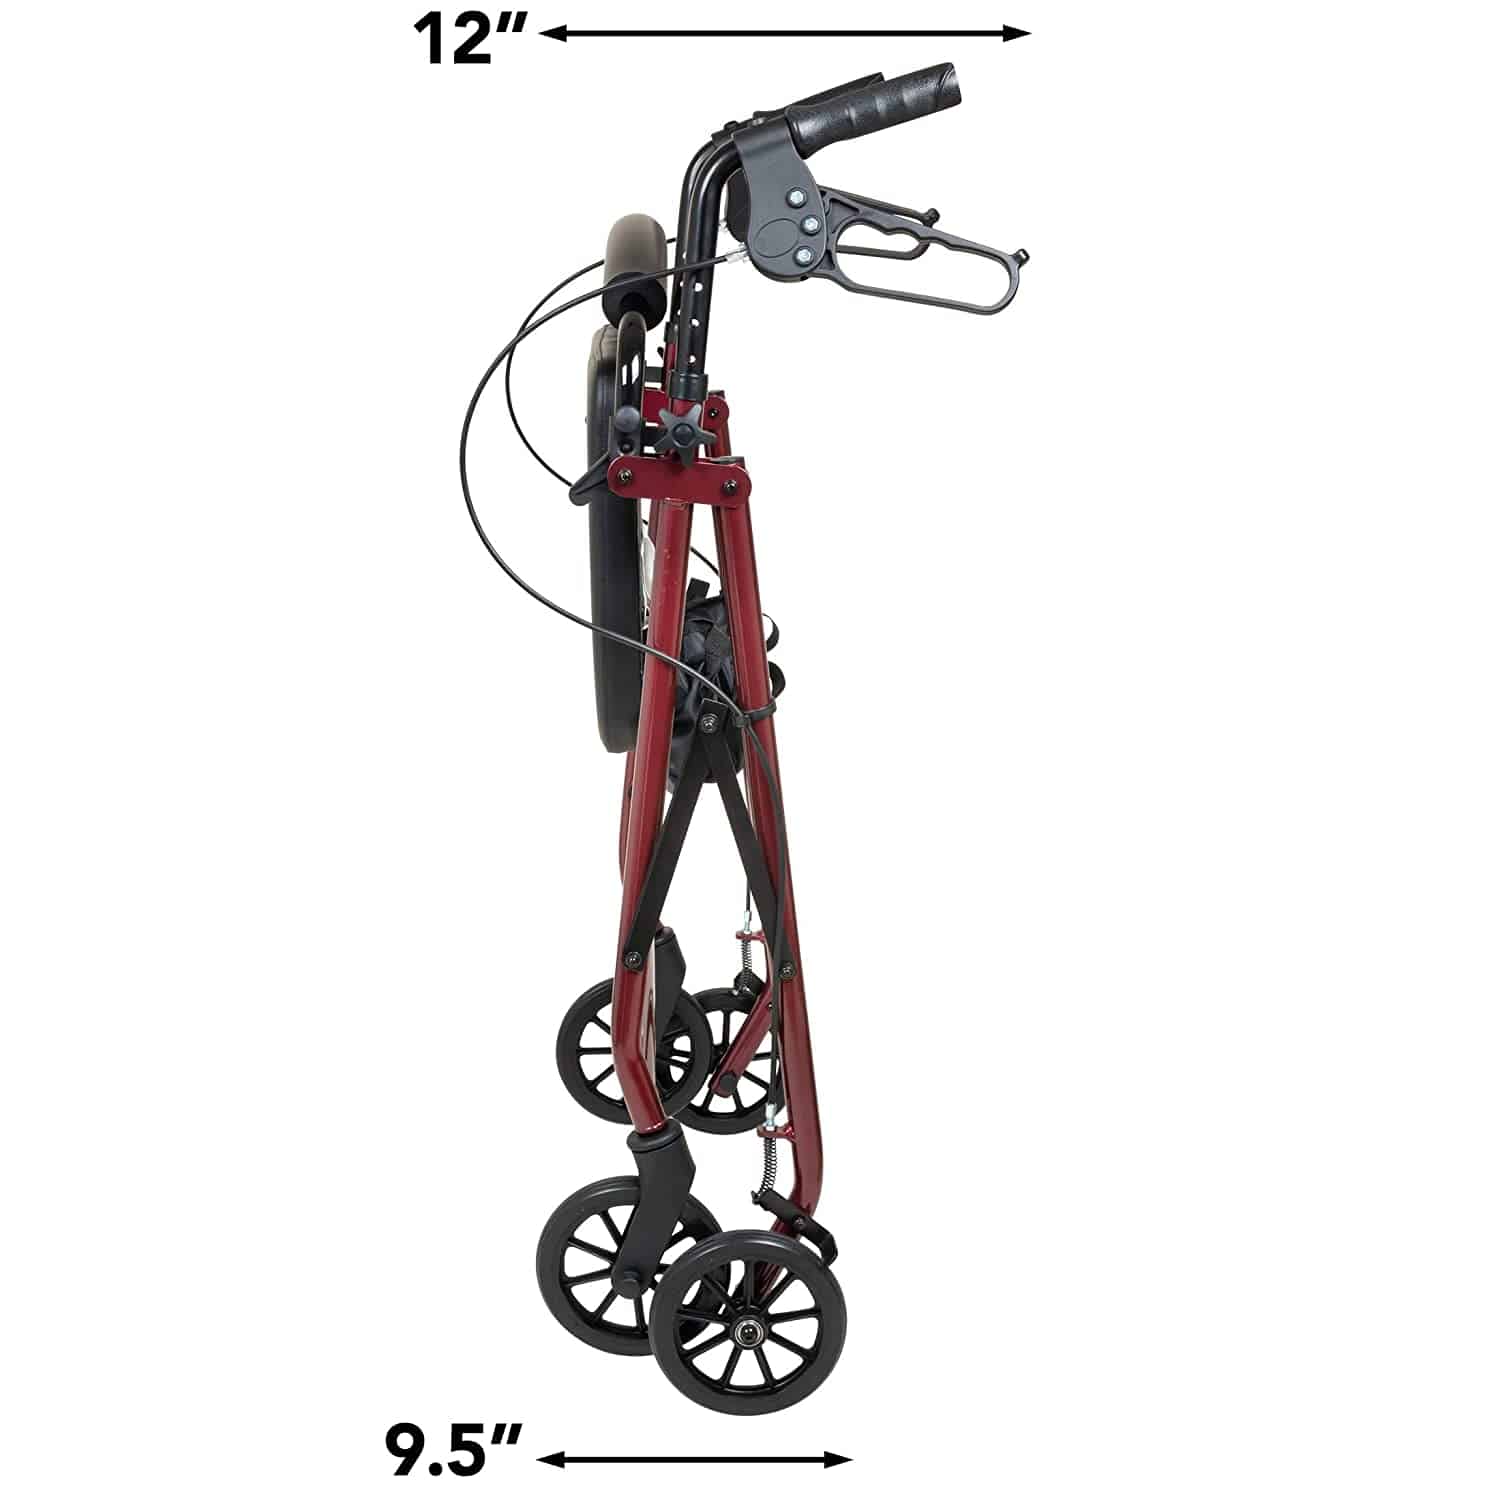 ProBasics Aluminum Rollator with 6-inch Wheels, 300 lb Weight Capacity - Carex Health Brands